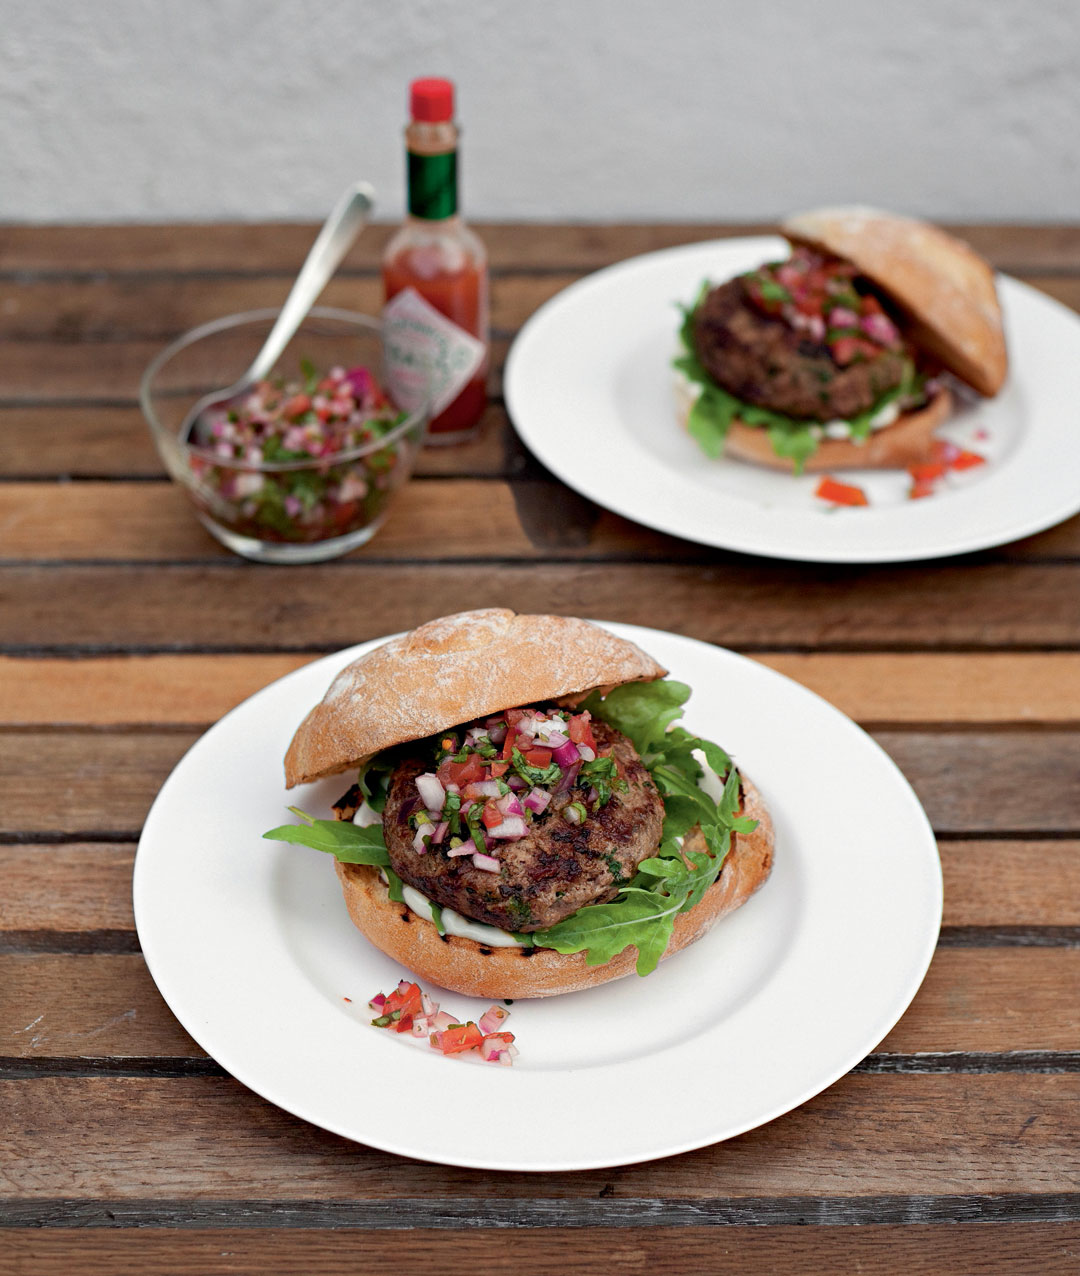 Chimichurri-style burgers by Jane Hornby from Simple & Classic. Photography by Liz and Max Haarala Hamilton 